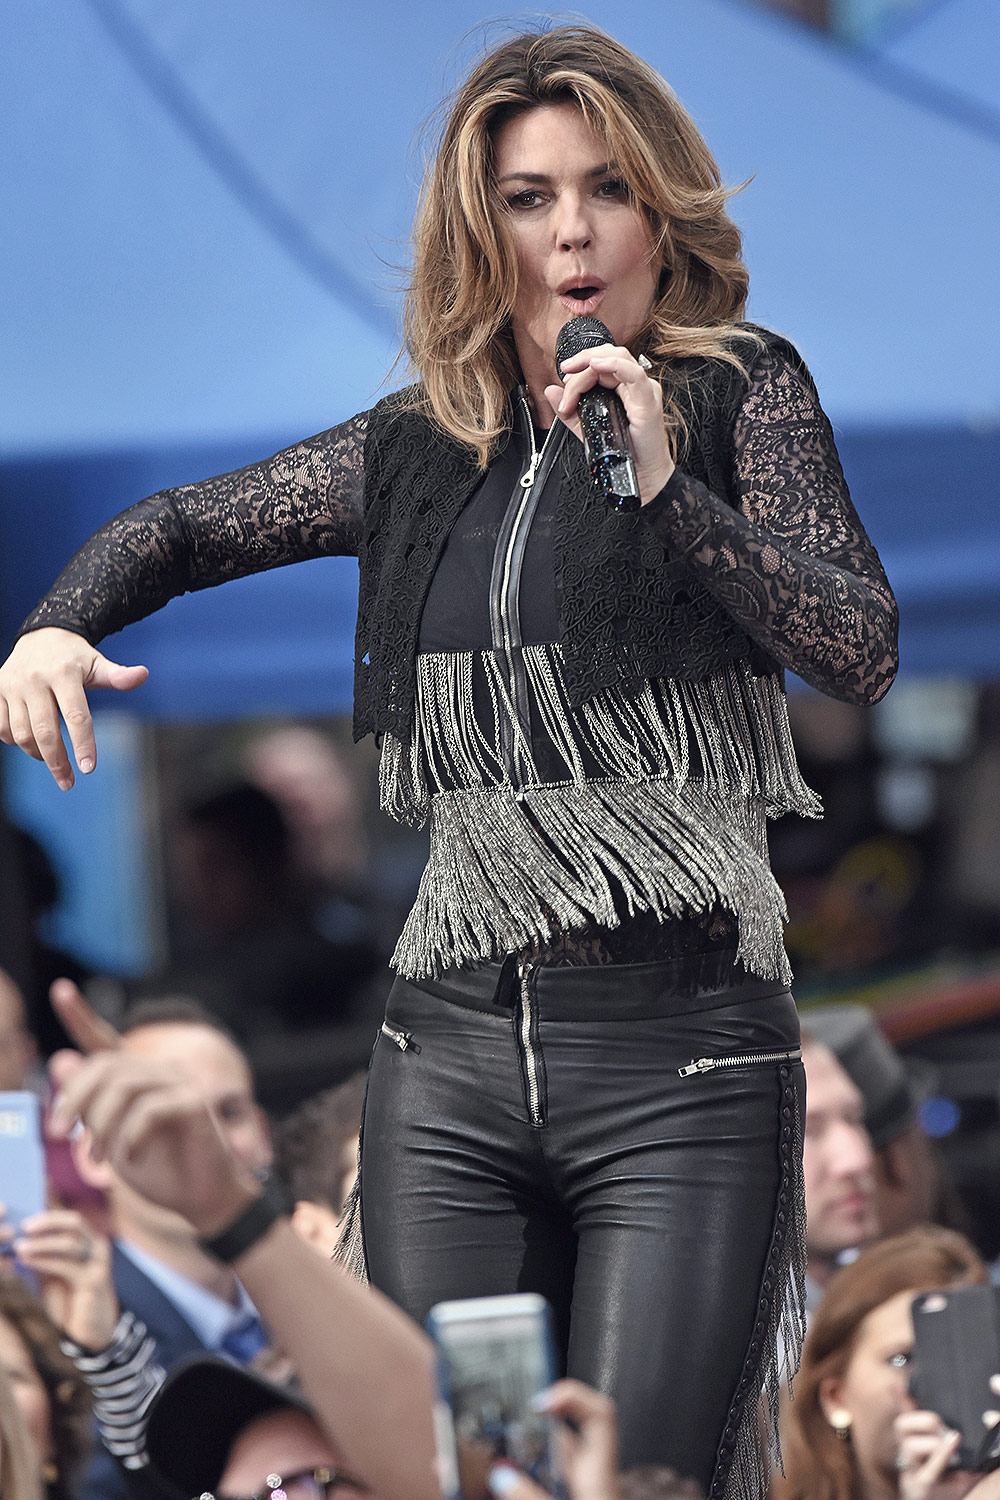 Shania Twain performs at Today show - Leather Celebrities